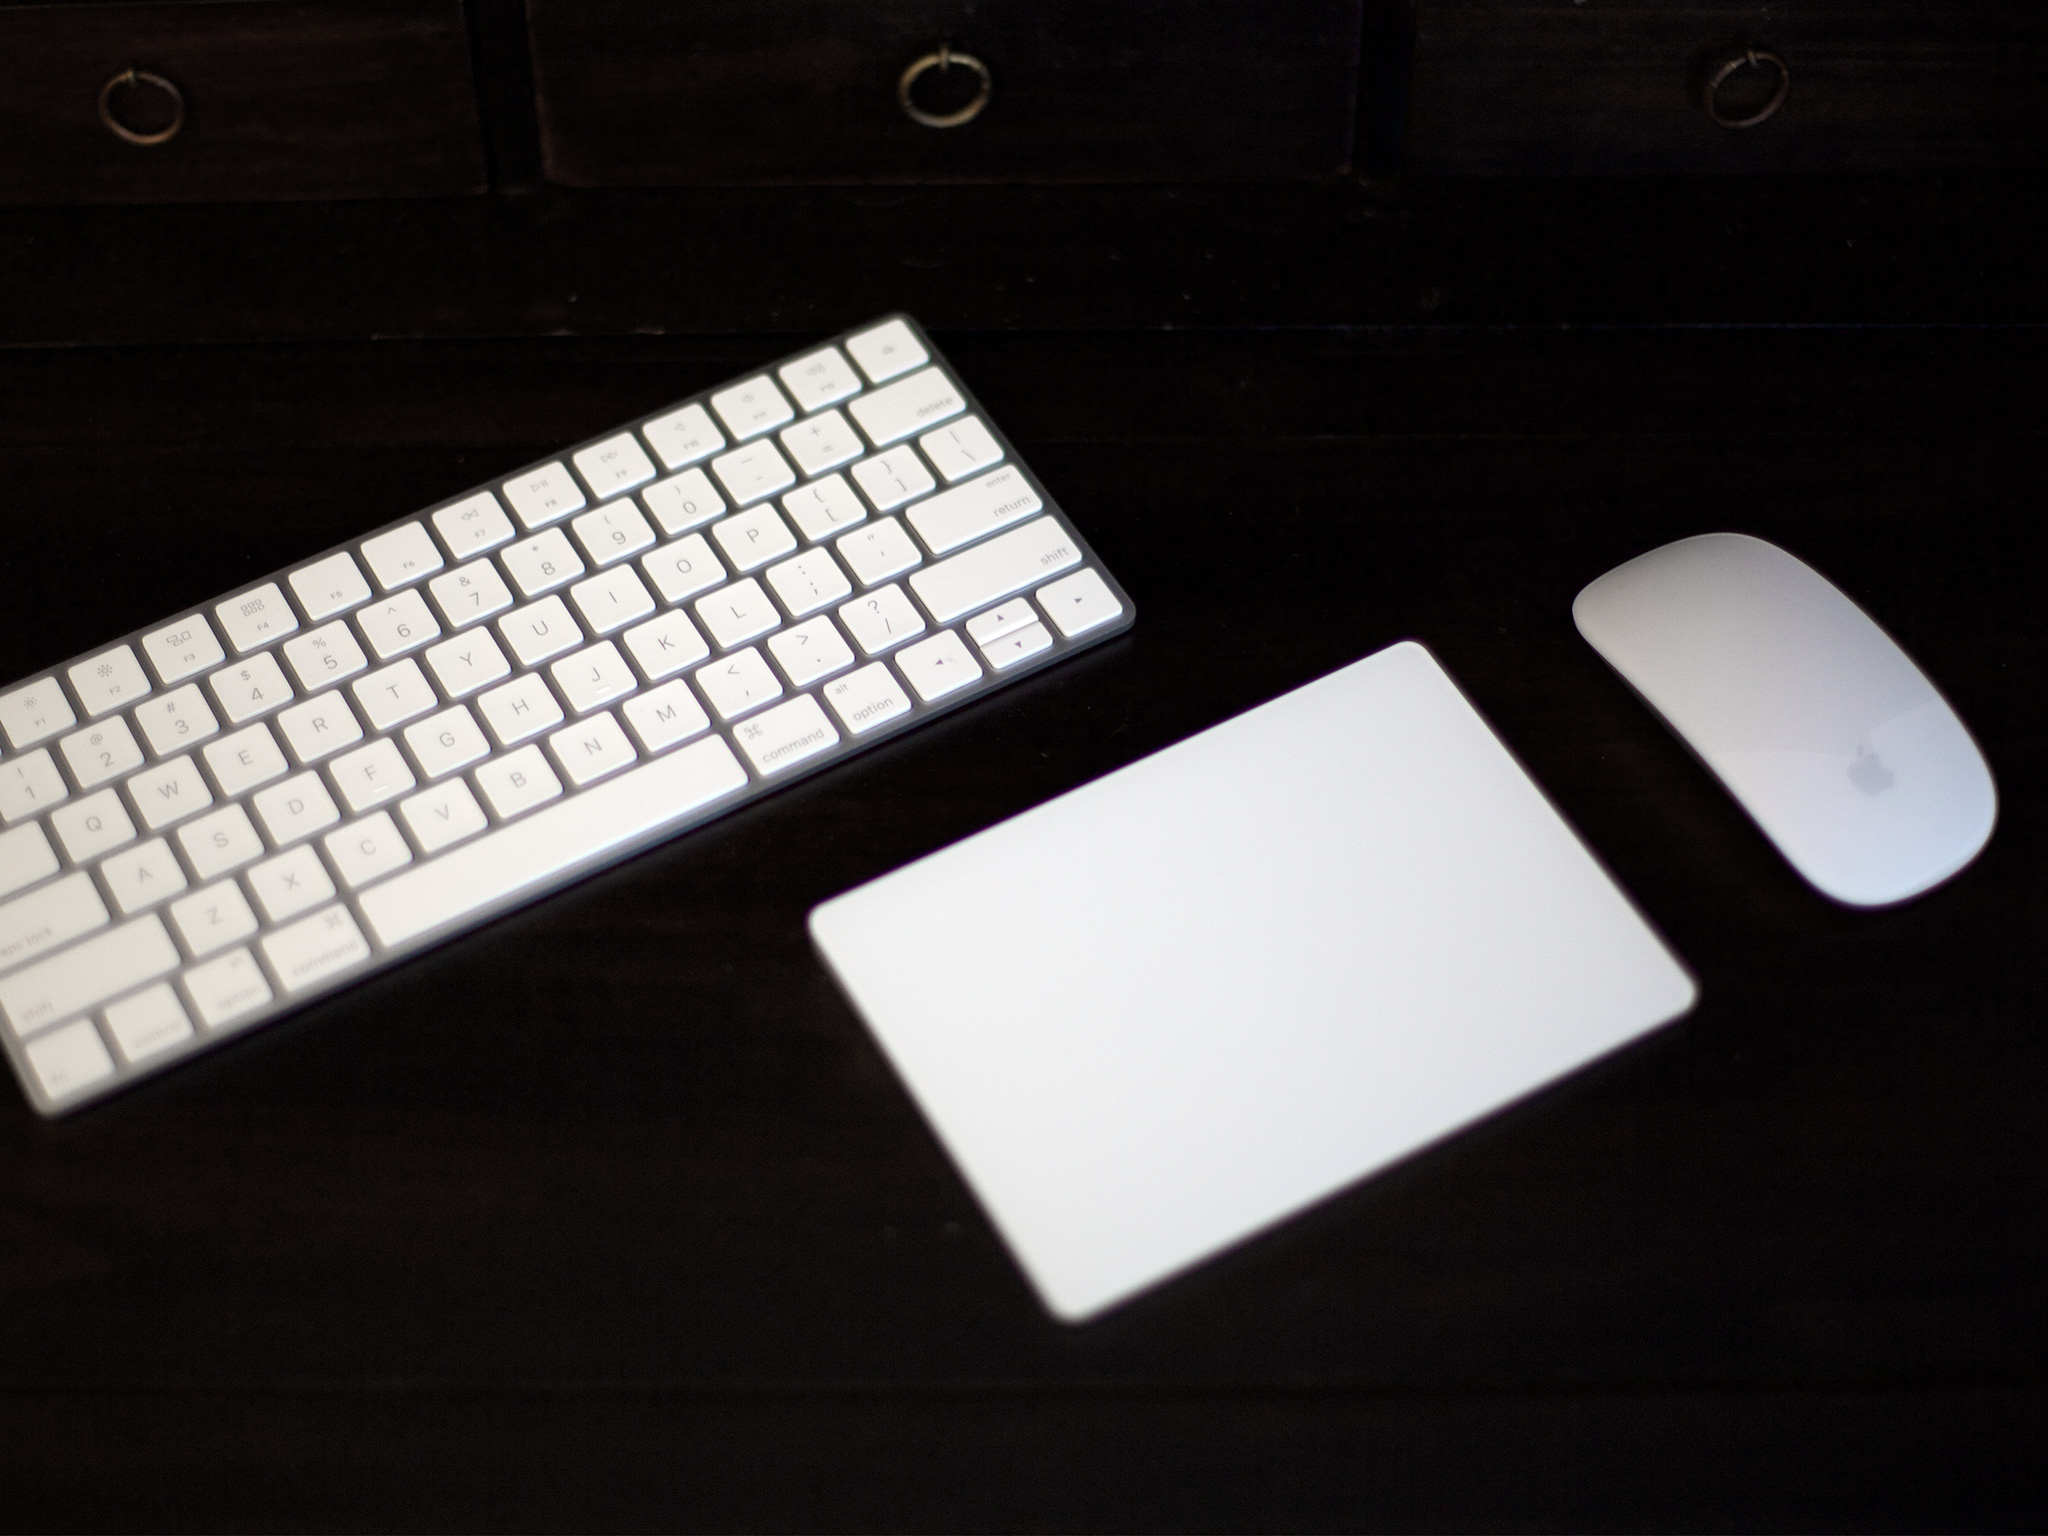 How to set up a Bluetooth keyboard and mouse on your Mac